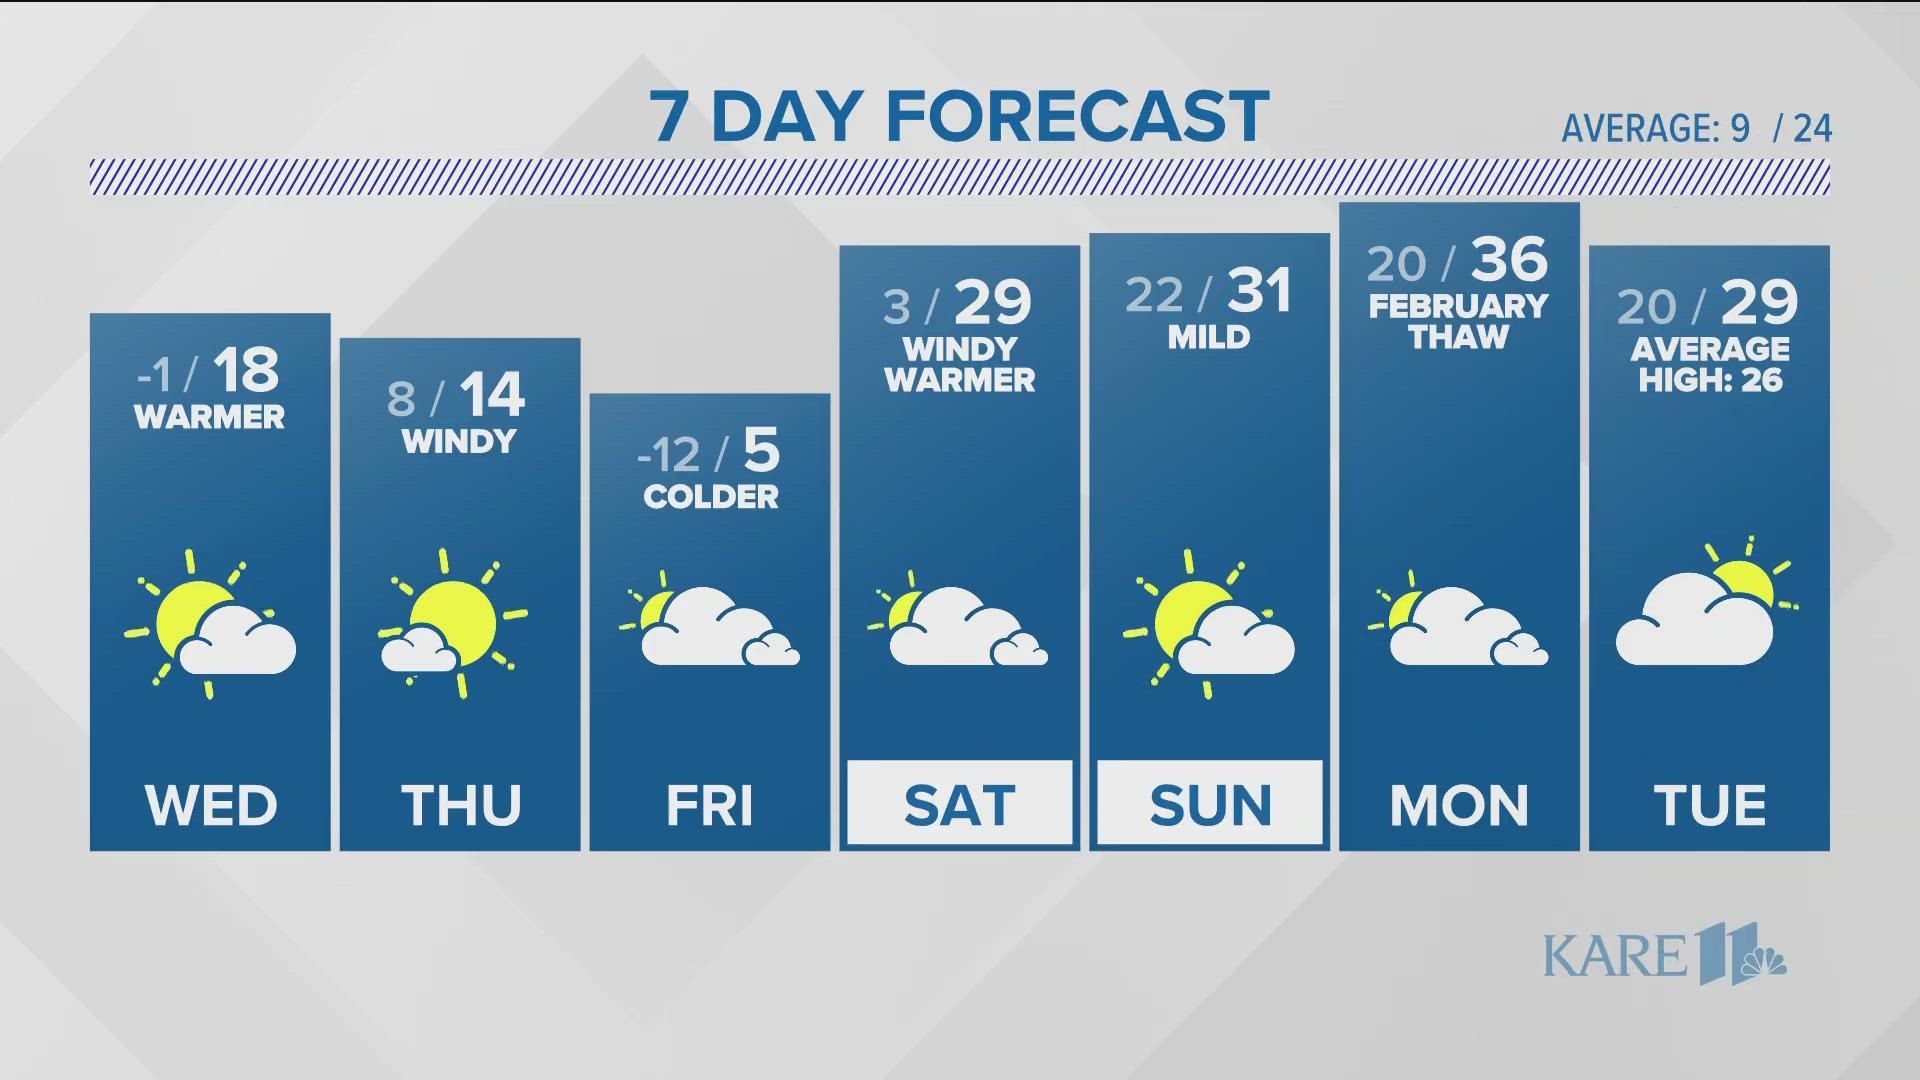 Windy conditions on Thursday with a cold Friday and a much warmer weekend.